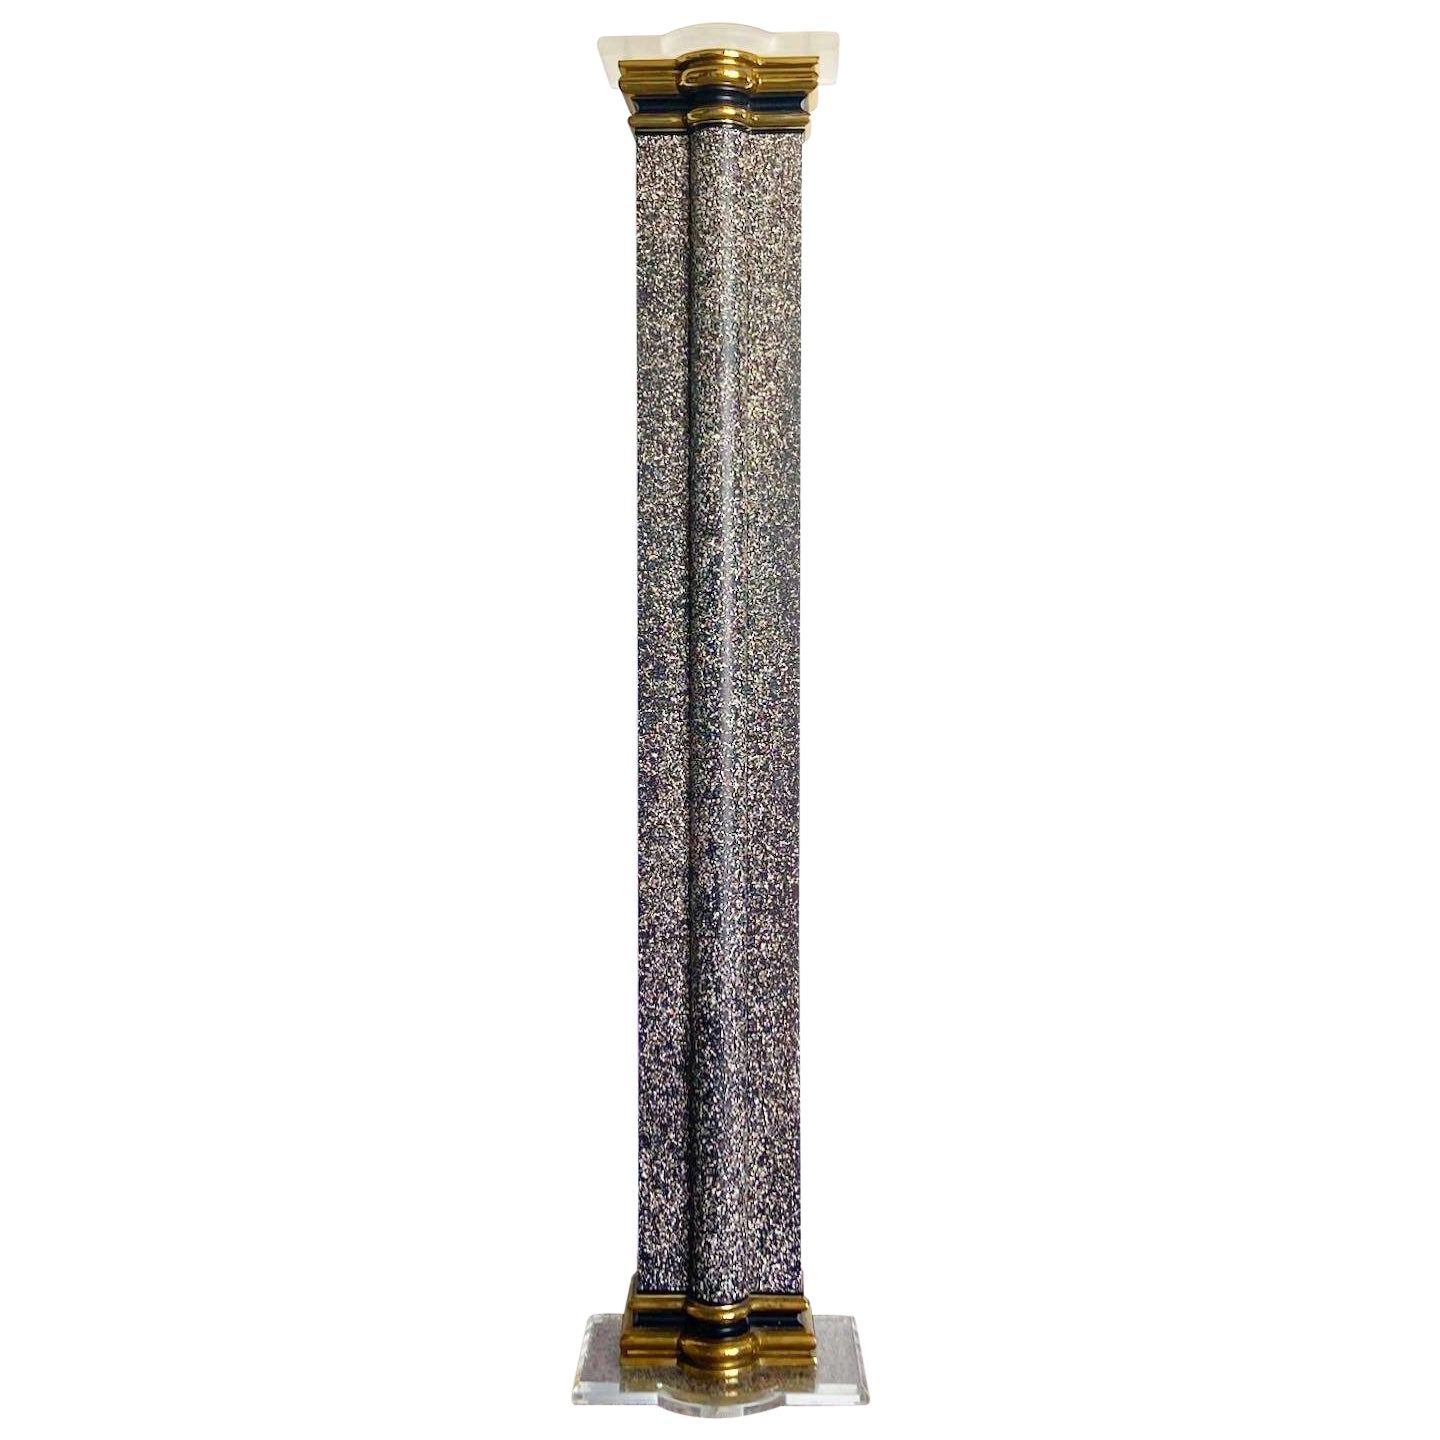 Art Deco Vintage Black White and Gold Torchiere Floor Lamp For Sale